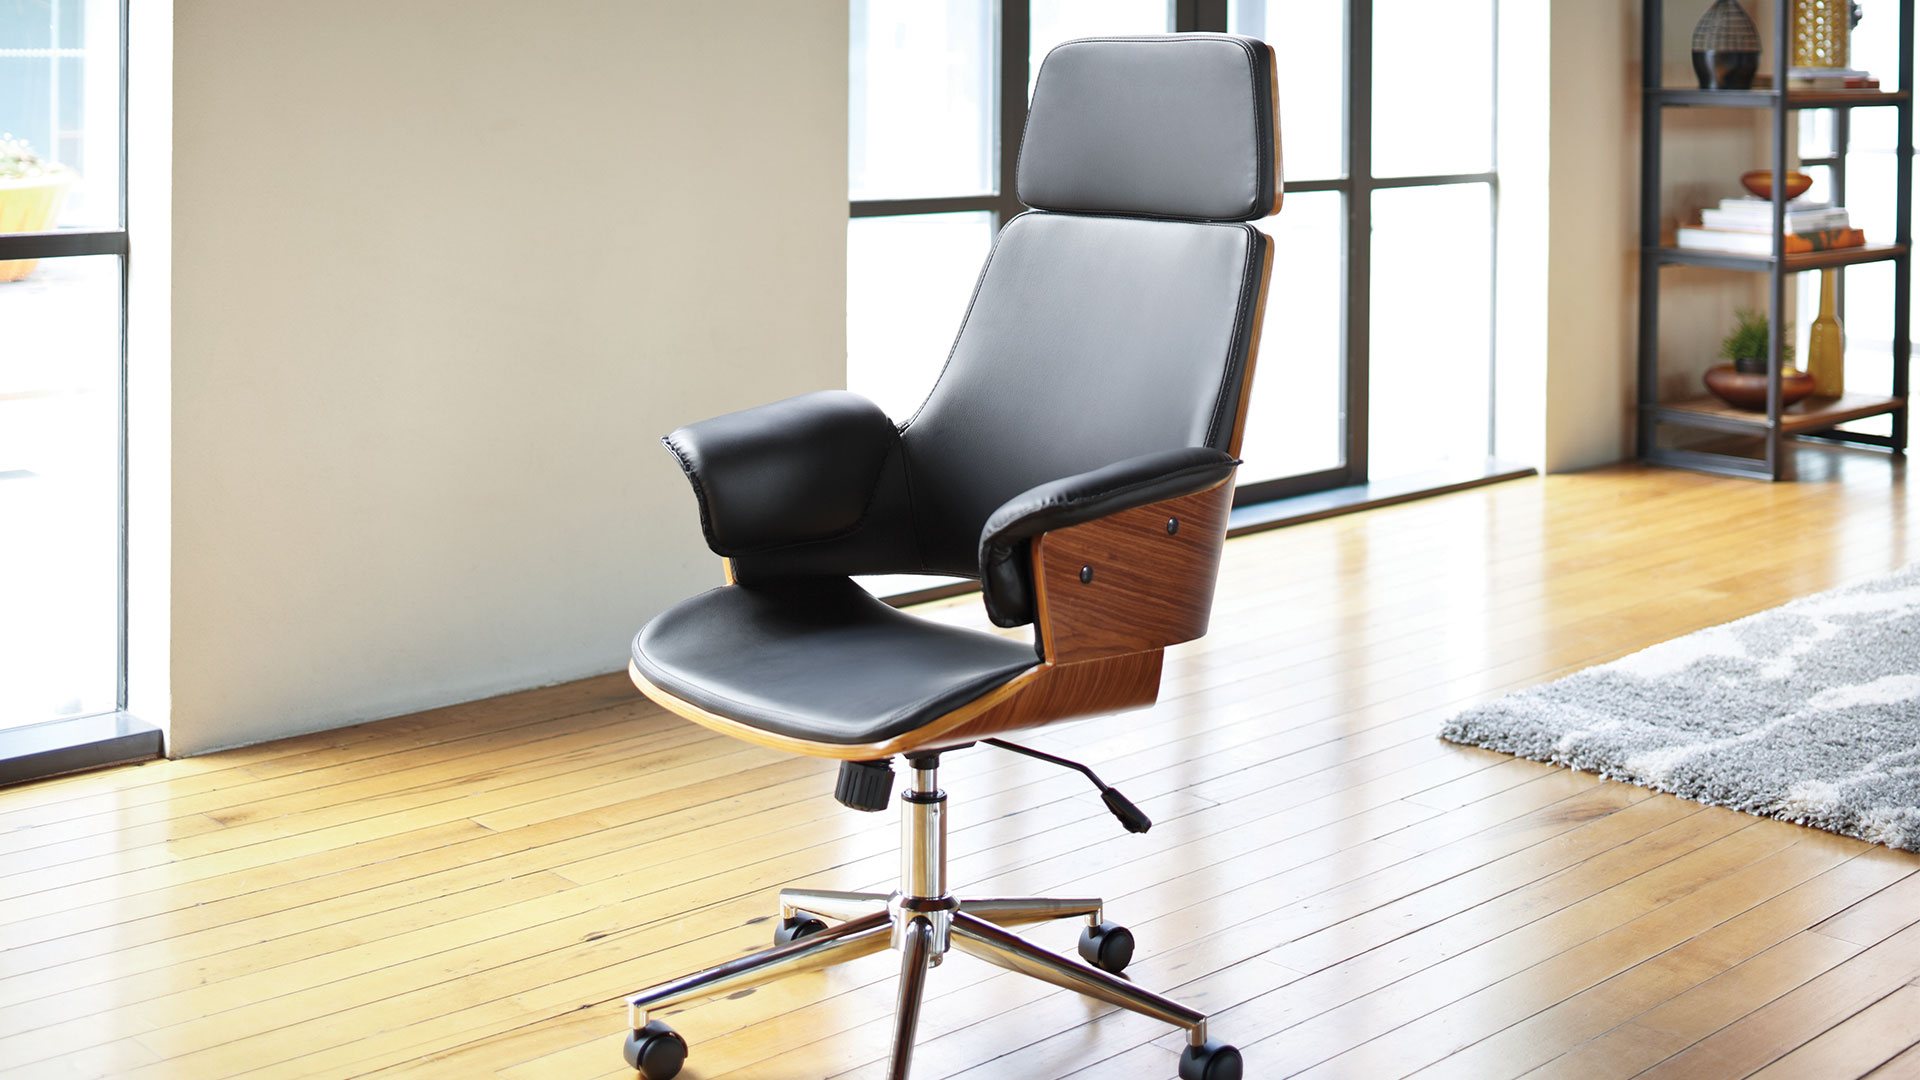 The Best Office Chairs Under $100 for 2020 [Comfortable Models]